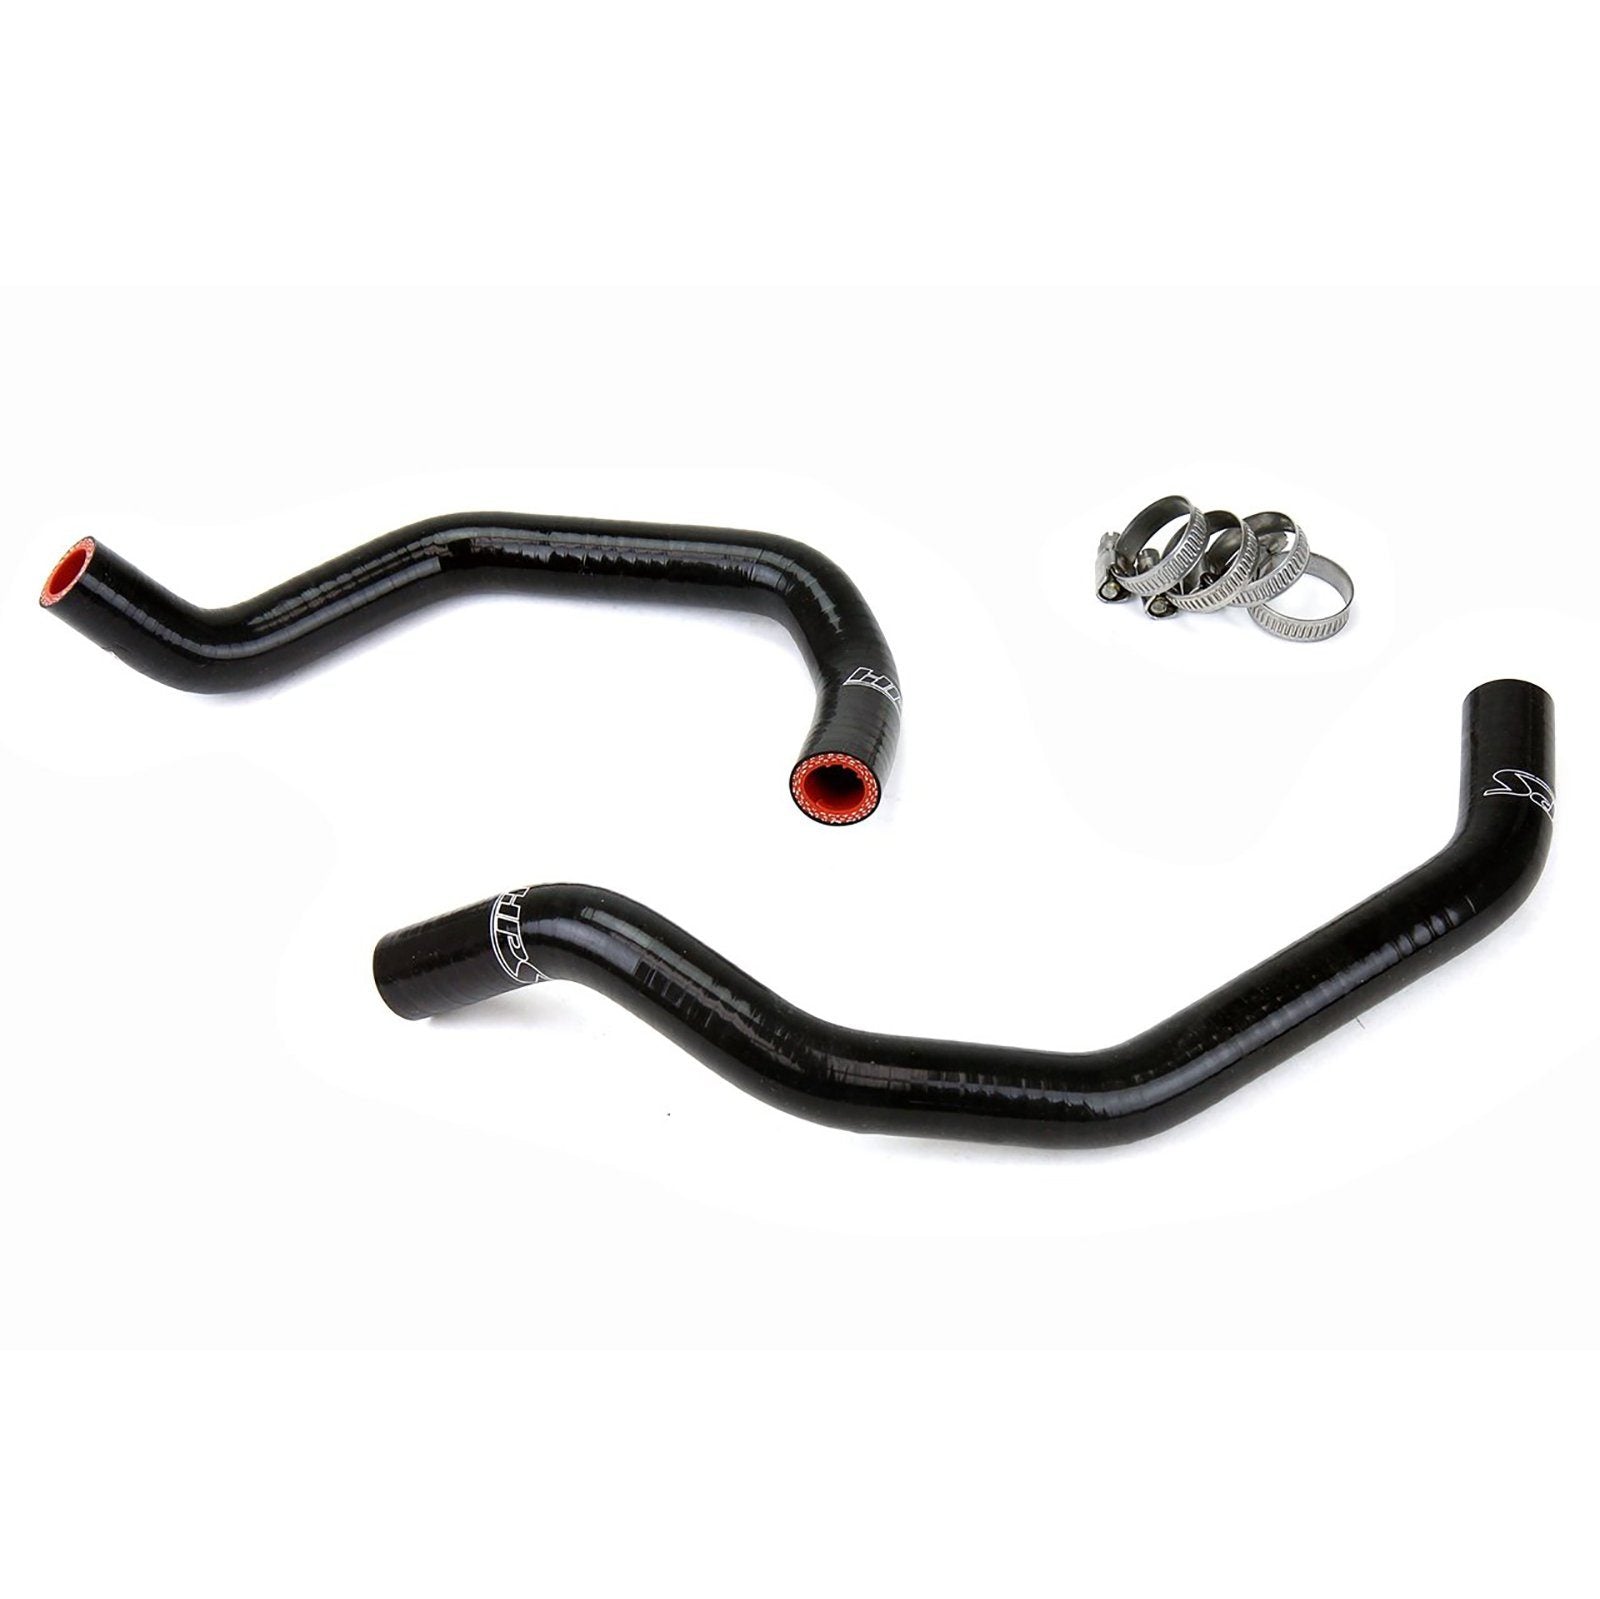 '12-17 Toyota Tundra 5.7L Reinforced Silicone Hose Kit Performance Products HPS Performance parts